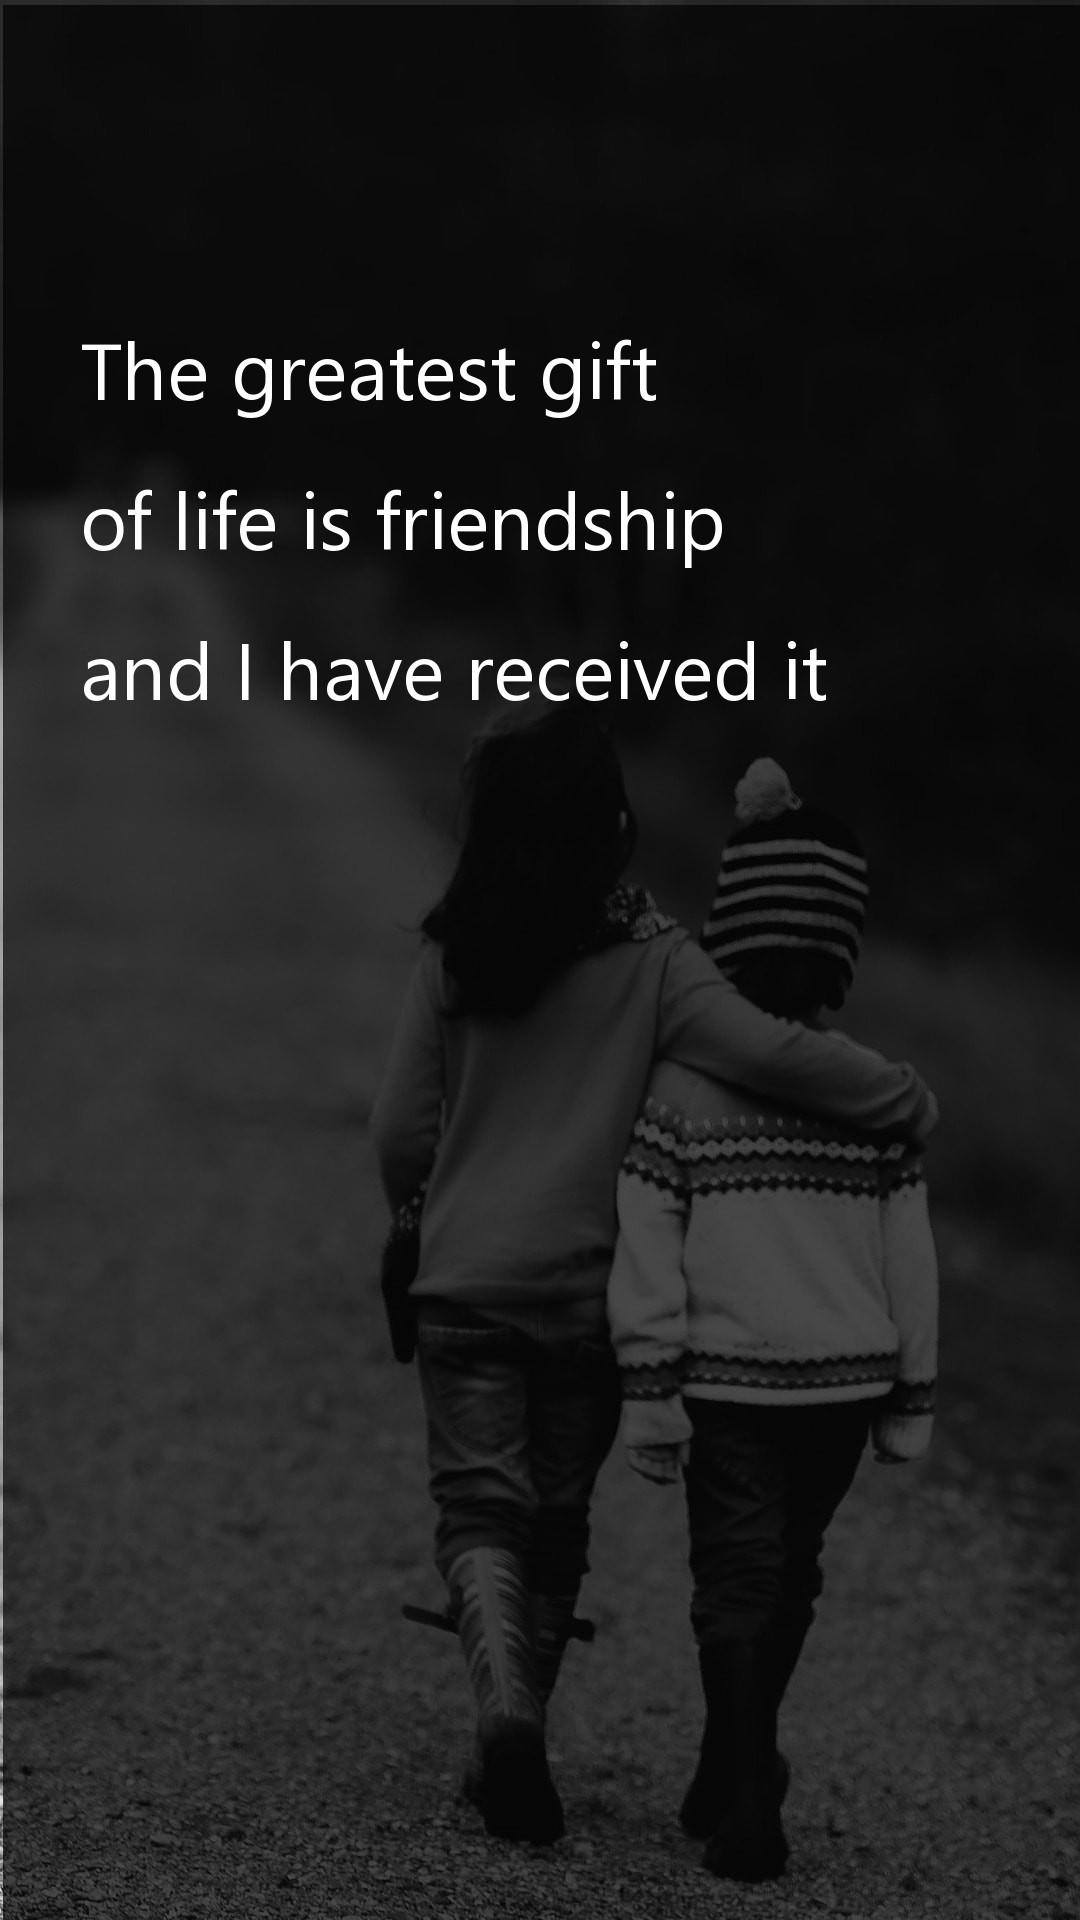 The greatest gift of life - Friendship Quotes at statush.com